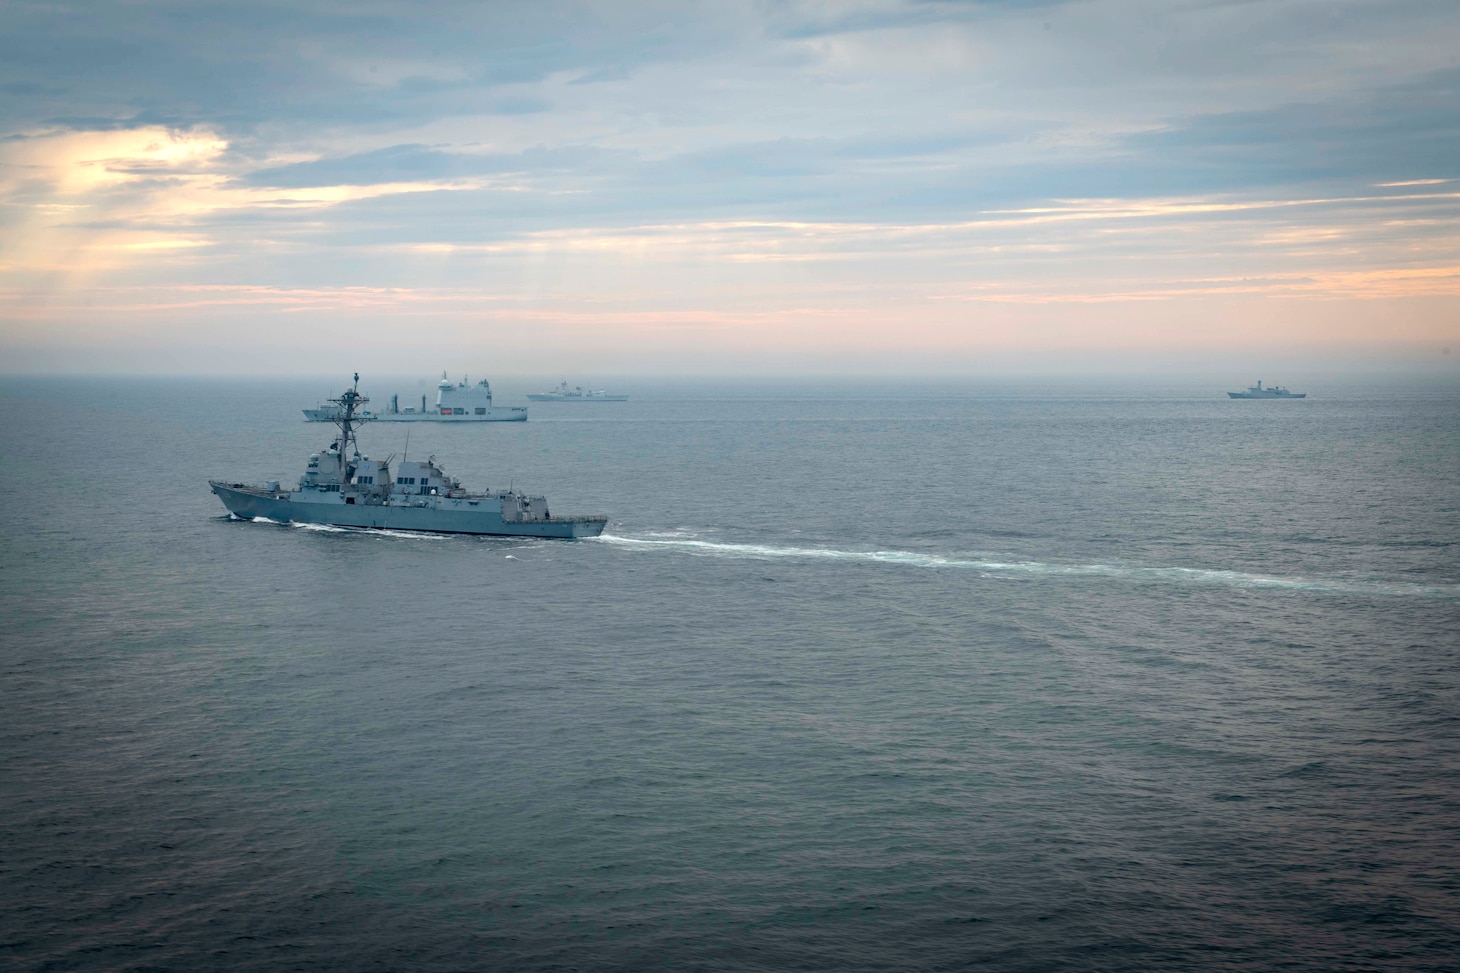 The Arleigh Burke-class guided-missile destroyer USS Thomas Hudner (DDG 116) transits in formation with ships participating in Operation Nanook from the U.S. Coast Guard, Royal Canadian Navy, Royal Danish Navy and French Navy., Aug. 9, 2020.